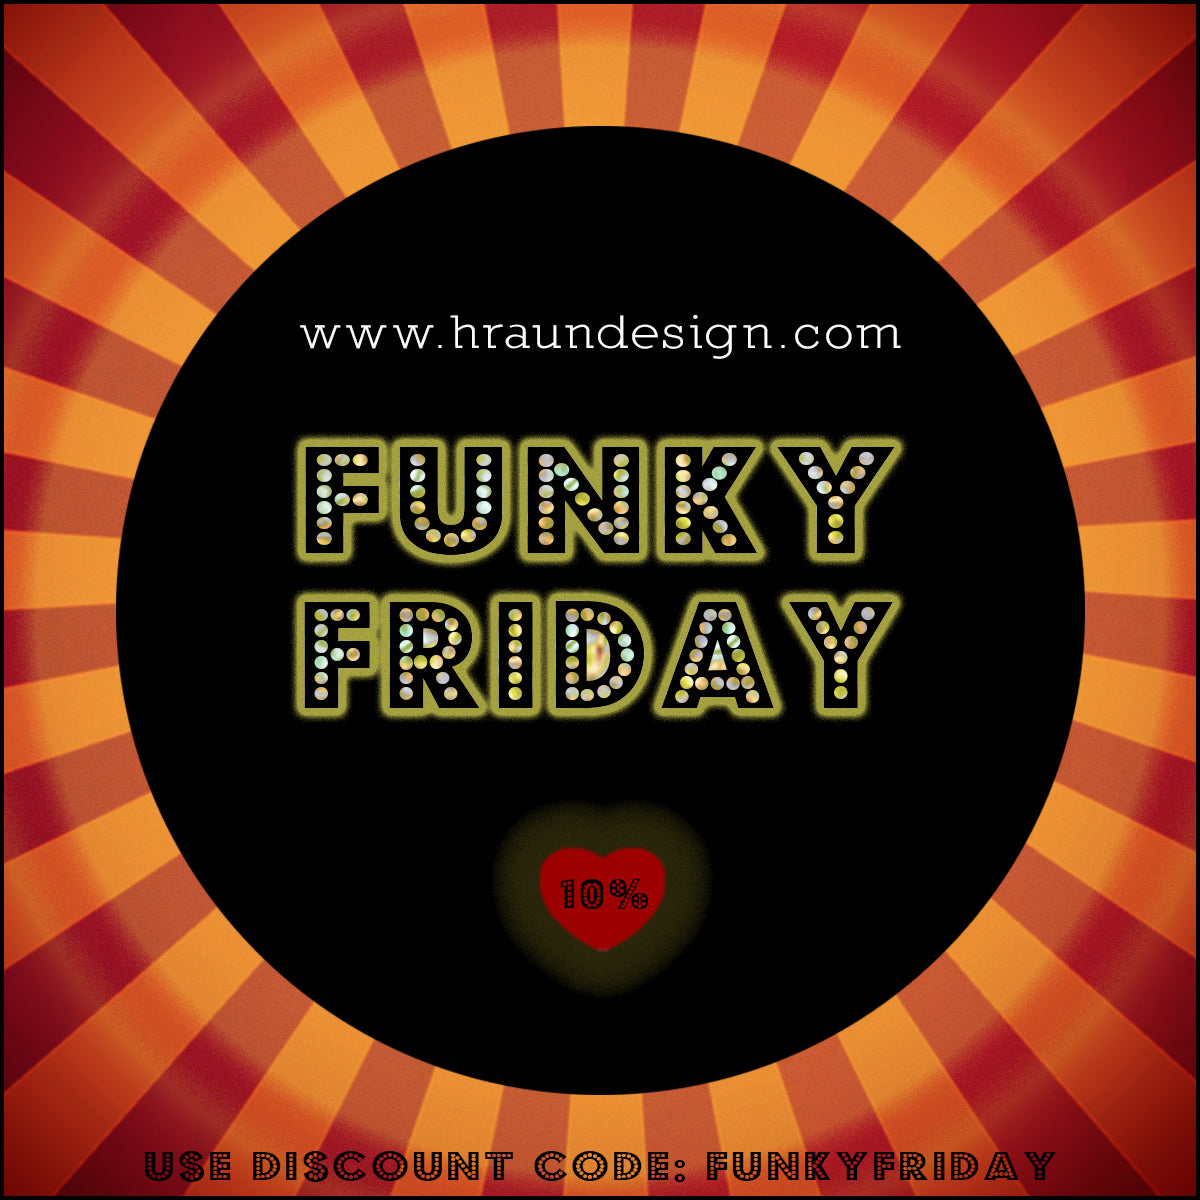 First funky friday in februar – Hraun- Art and design